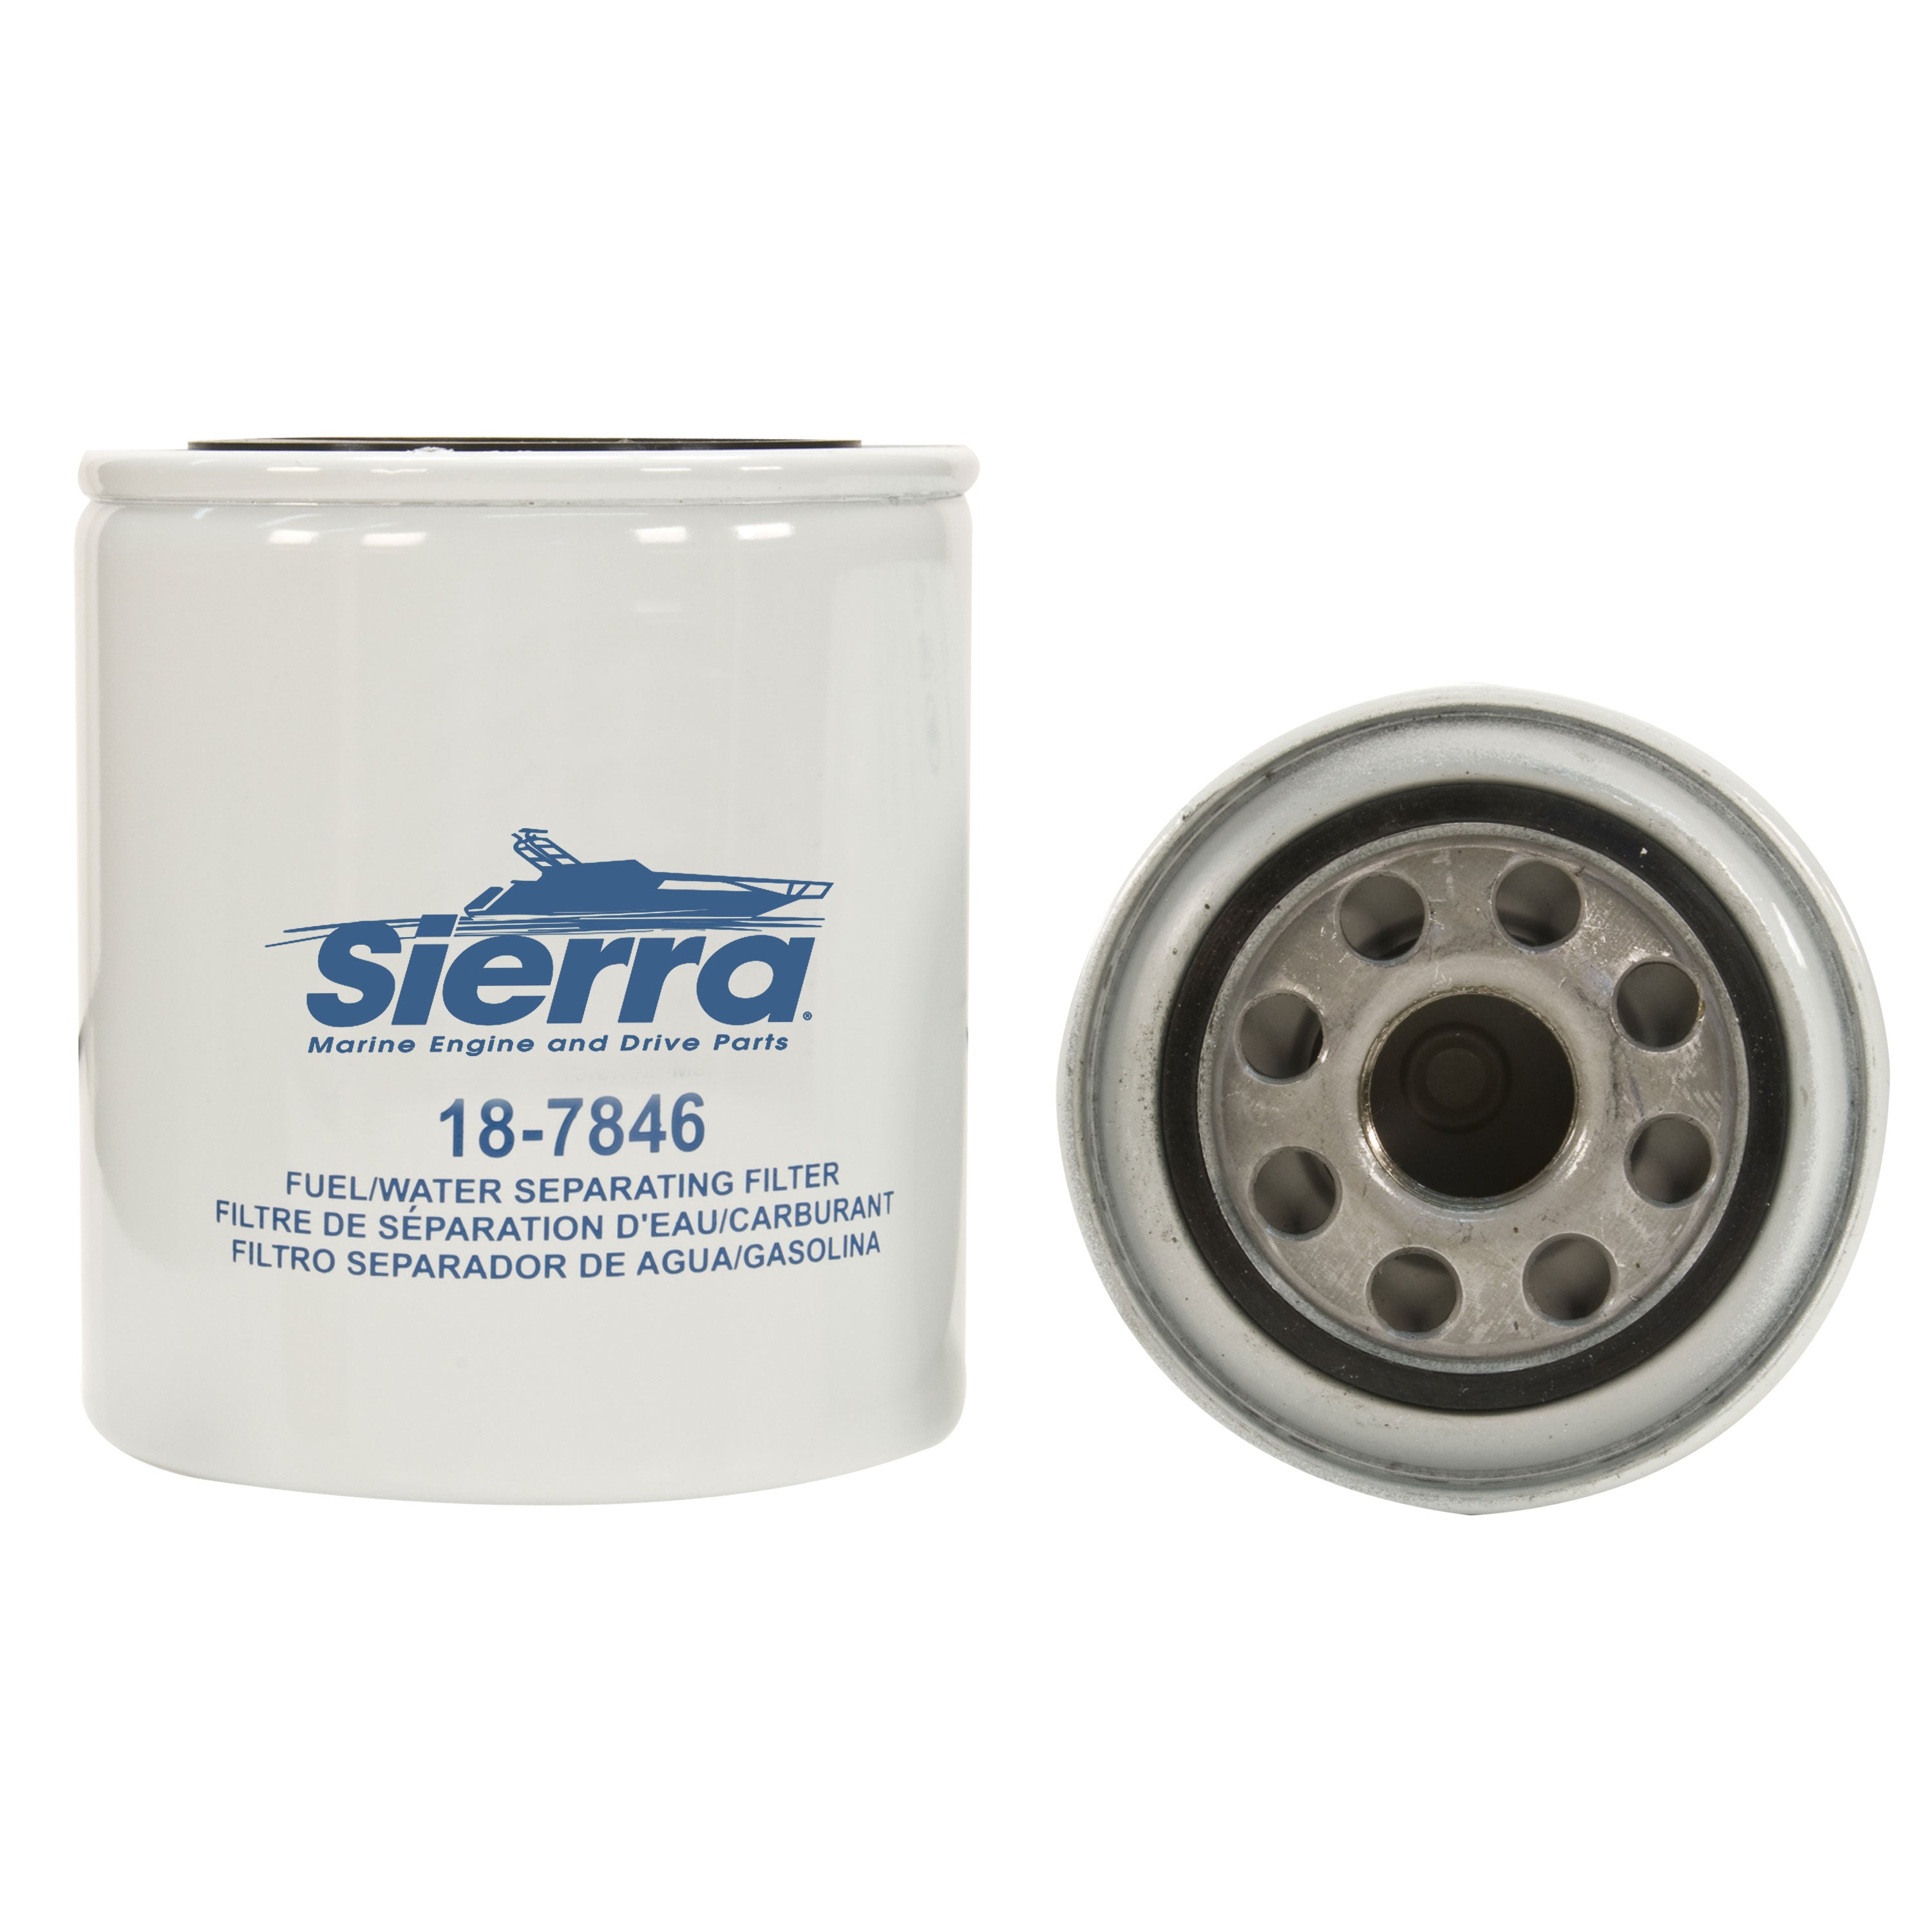 Sierra 18-7846 21 Micron Replacement Fuel Filter - OMC Thread